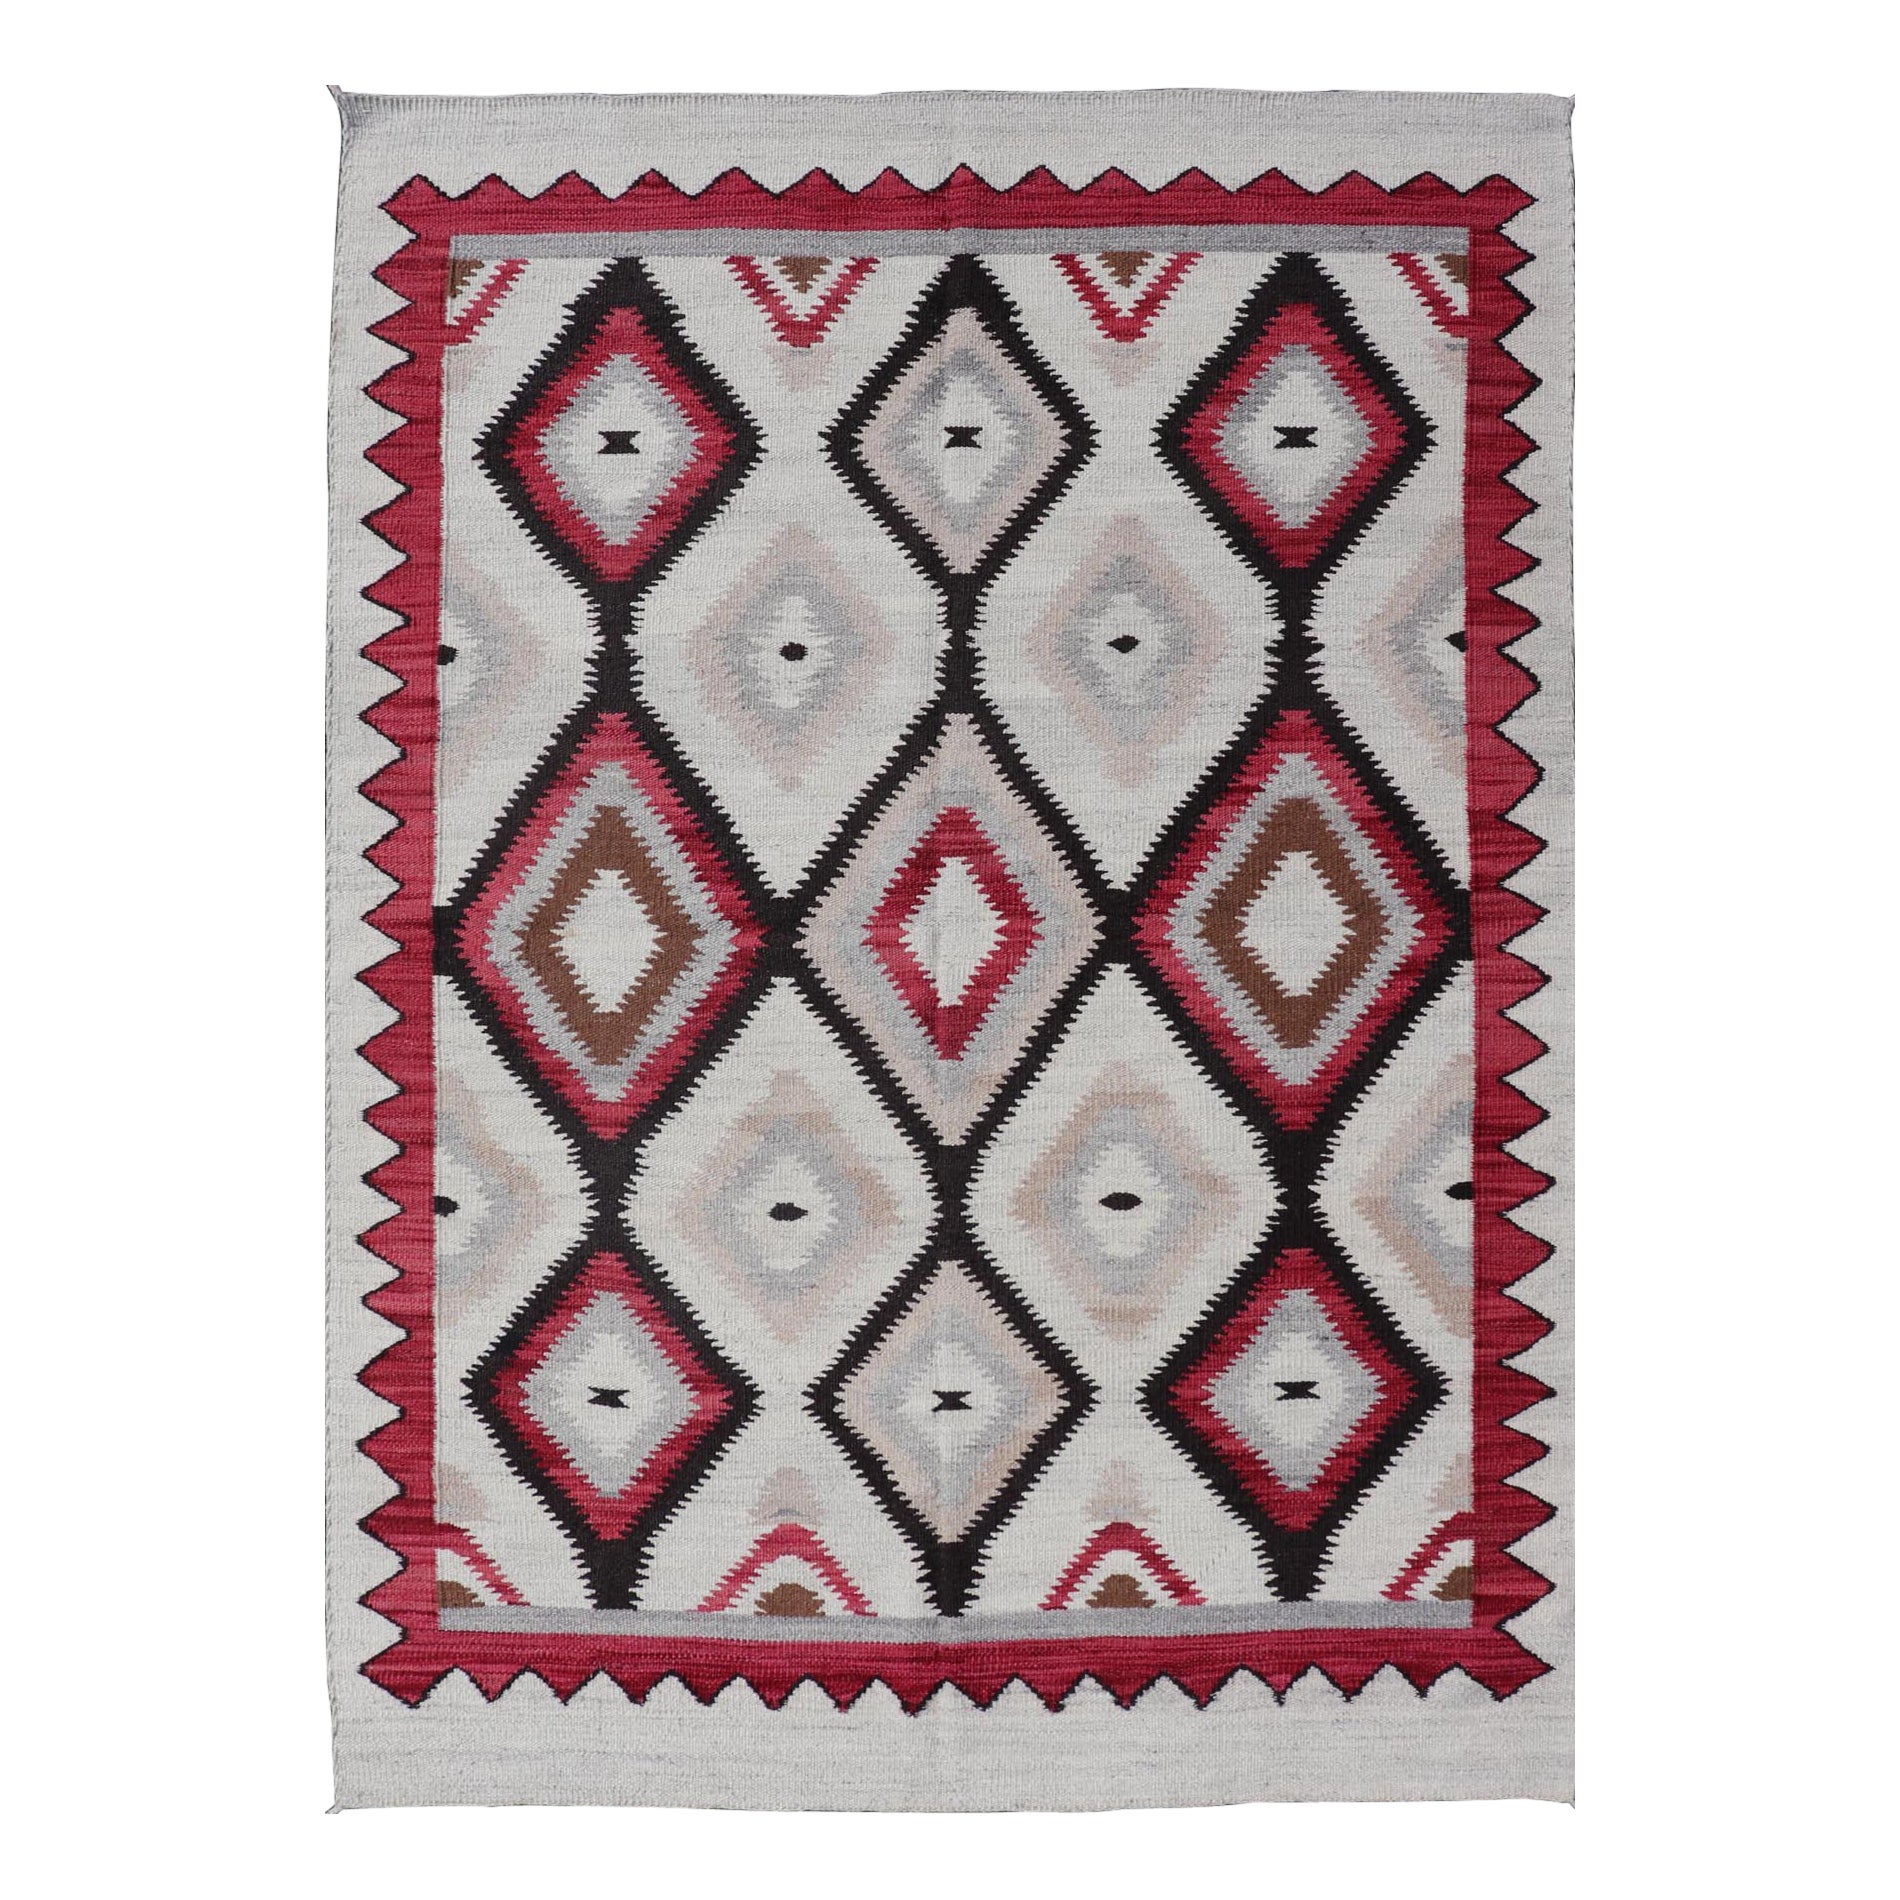 American Navajo Design Rug with Latticework Tribal Design in Red, Black and Gray For Sale